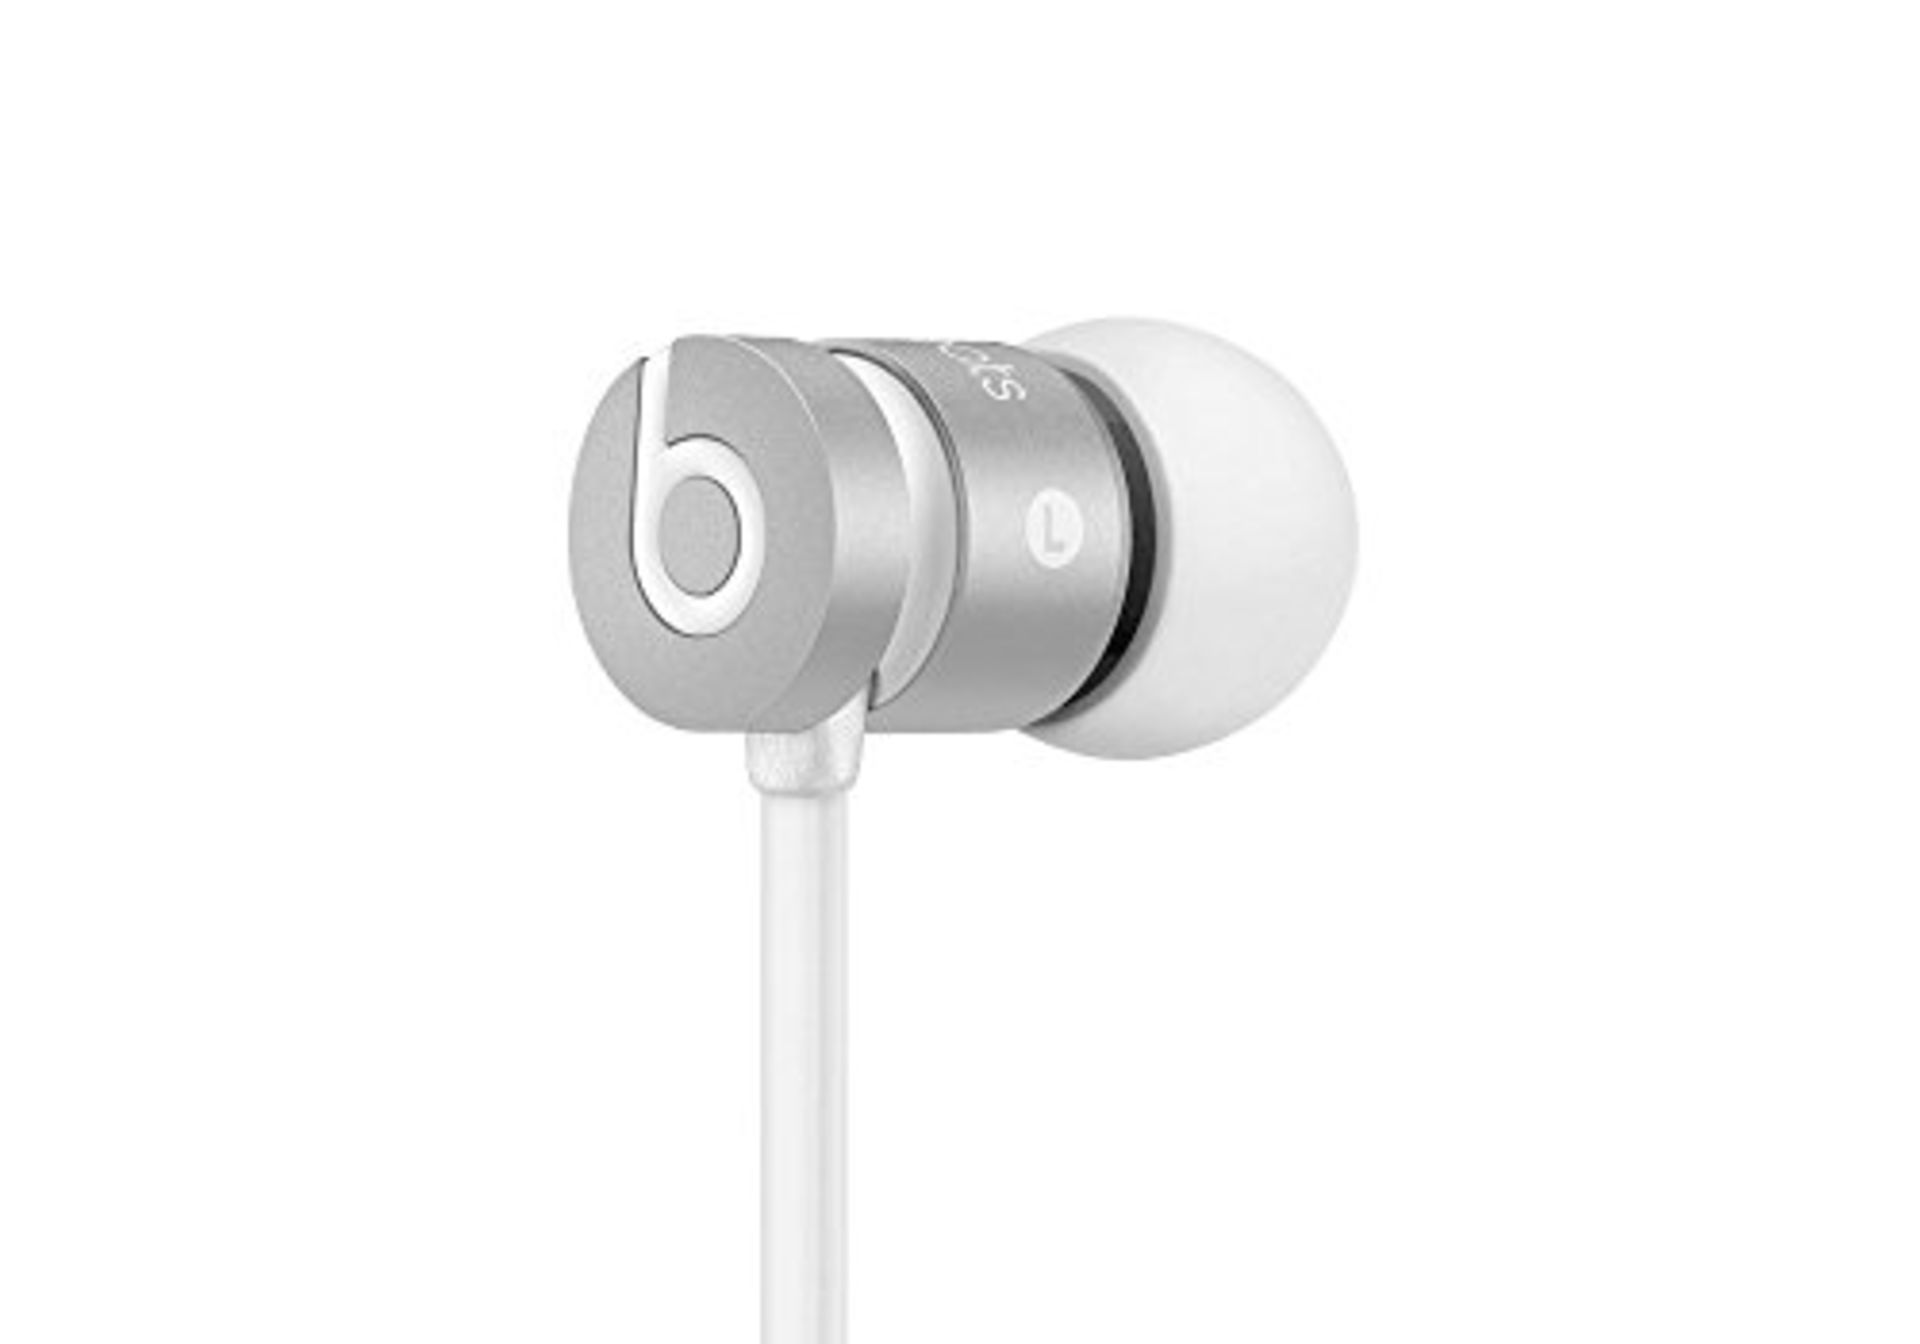 RRP £98.00 Beats by Dr. Dre UrBeats In-Ear Headphones - Silver - Image 2 of 2